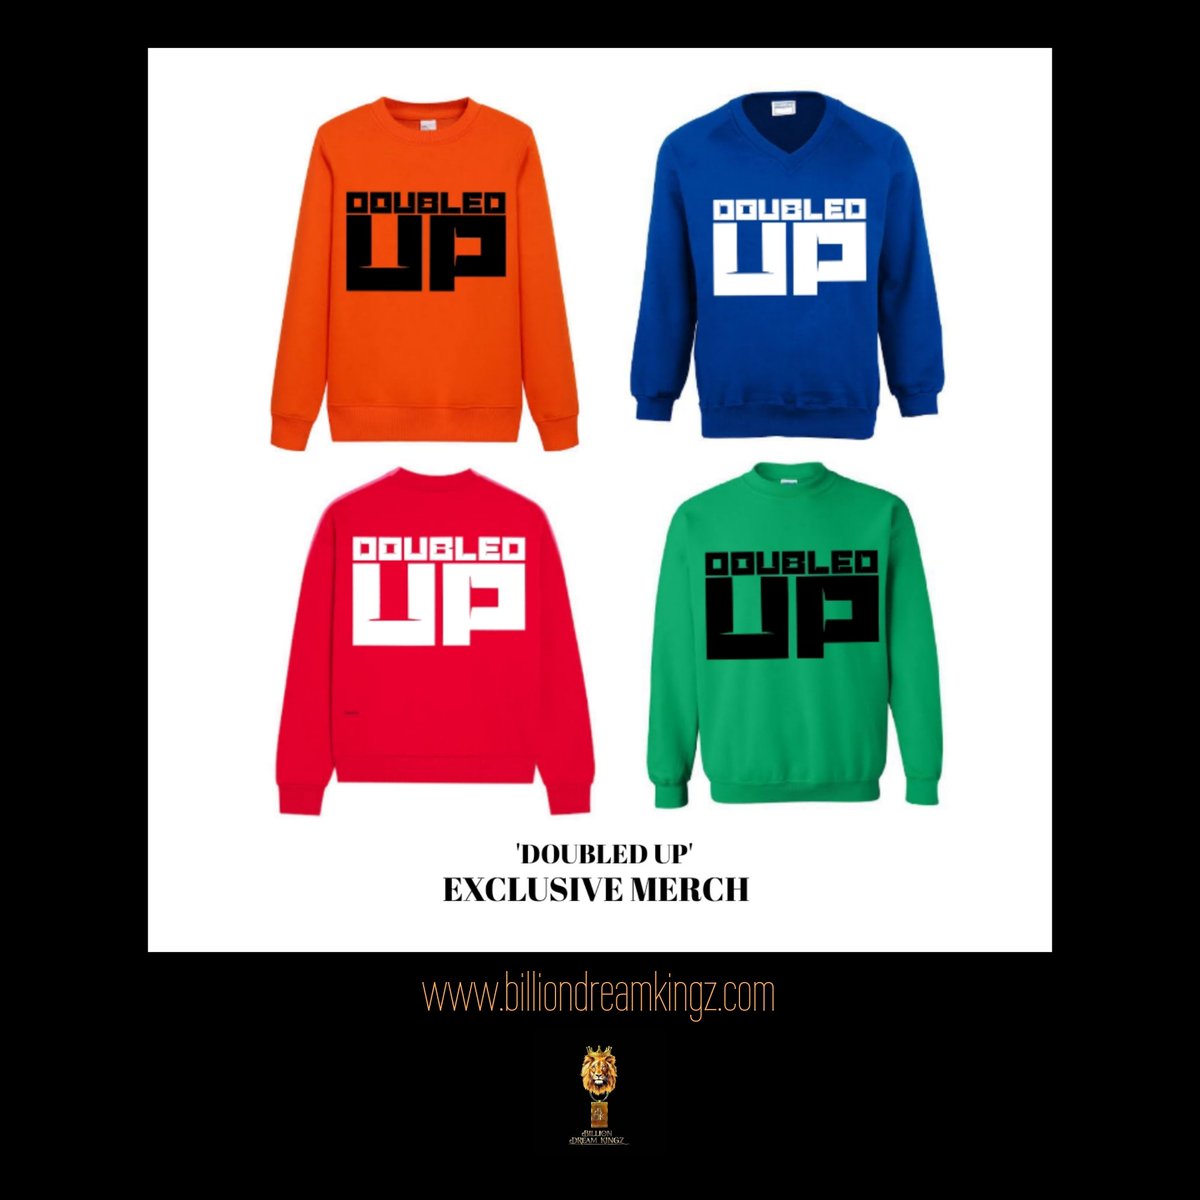 #Fanluv the #DoubledUp anniversary exclusive merch still available and selling go #ShopNow

Cc: @bdk_kingz